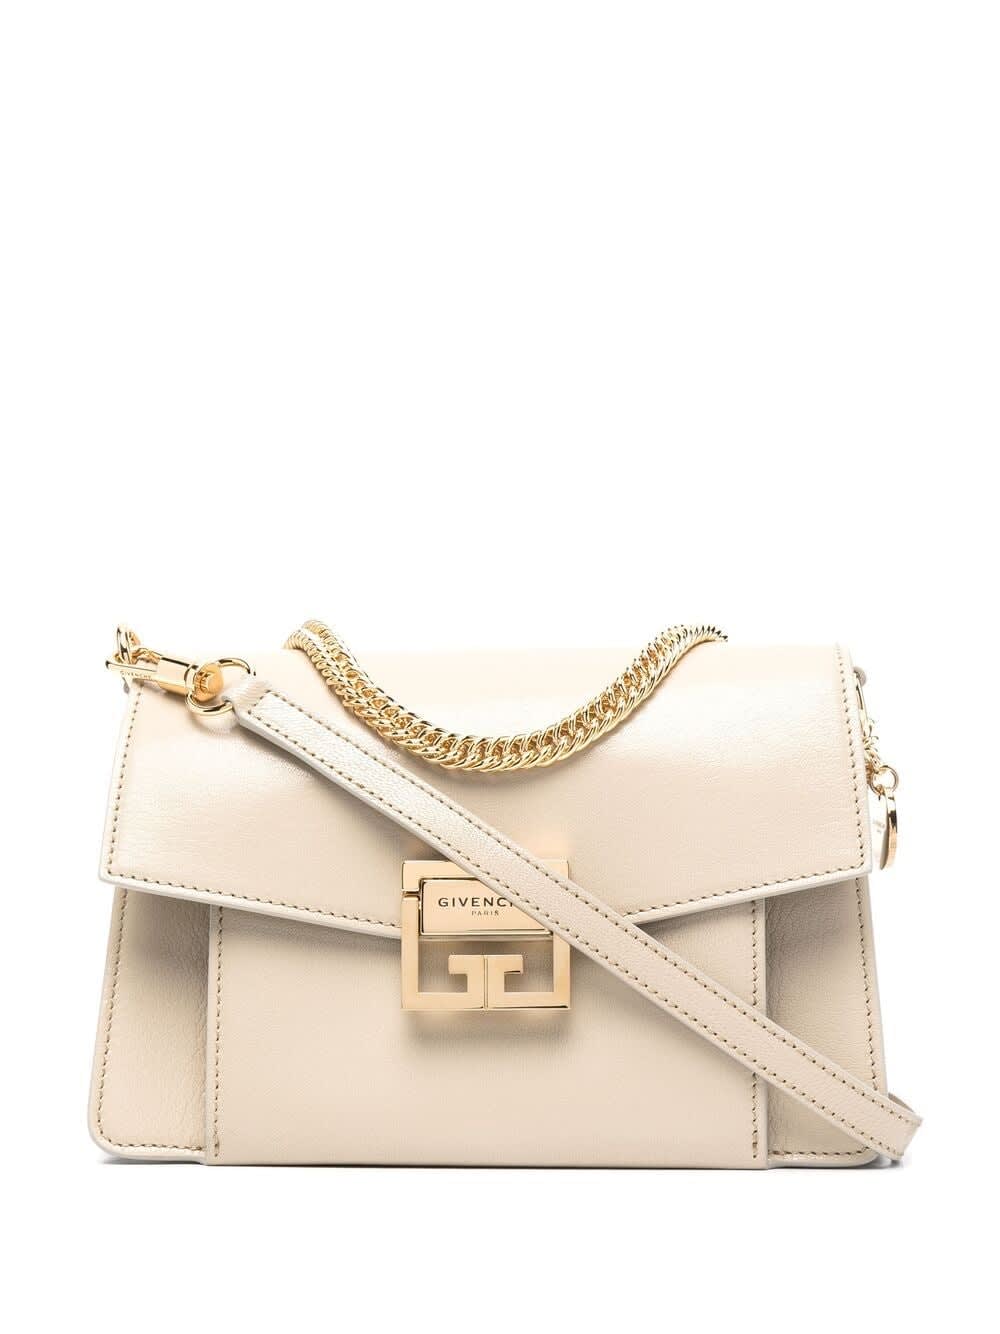 Givenchy Small Gv3 Bag In Beige Leather